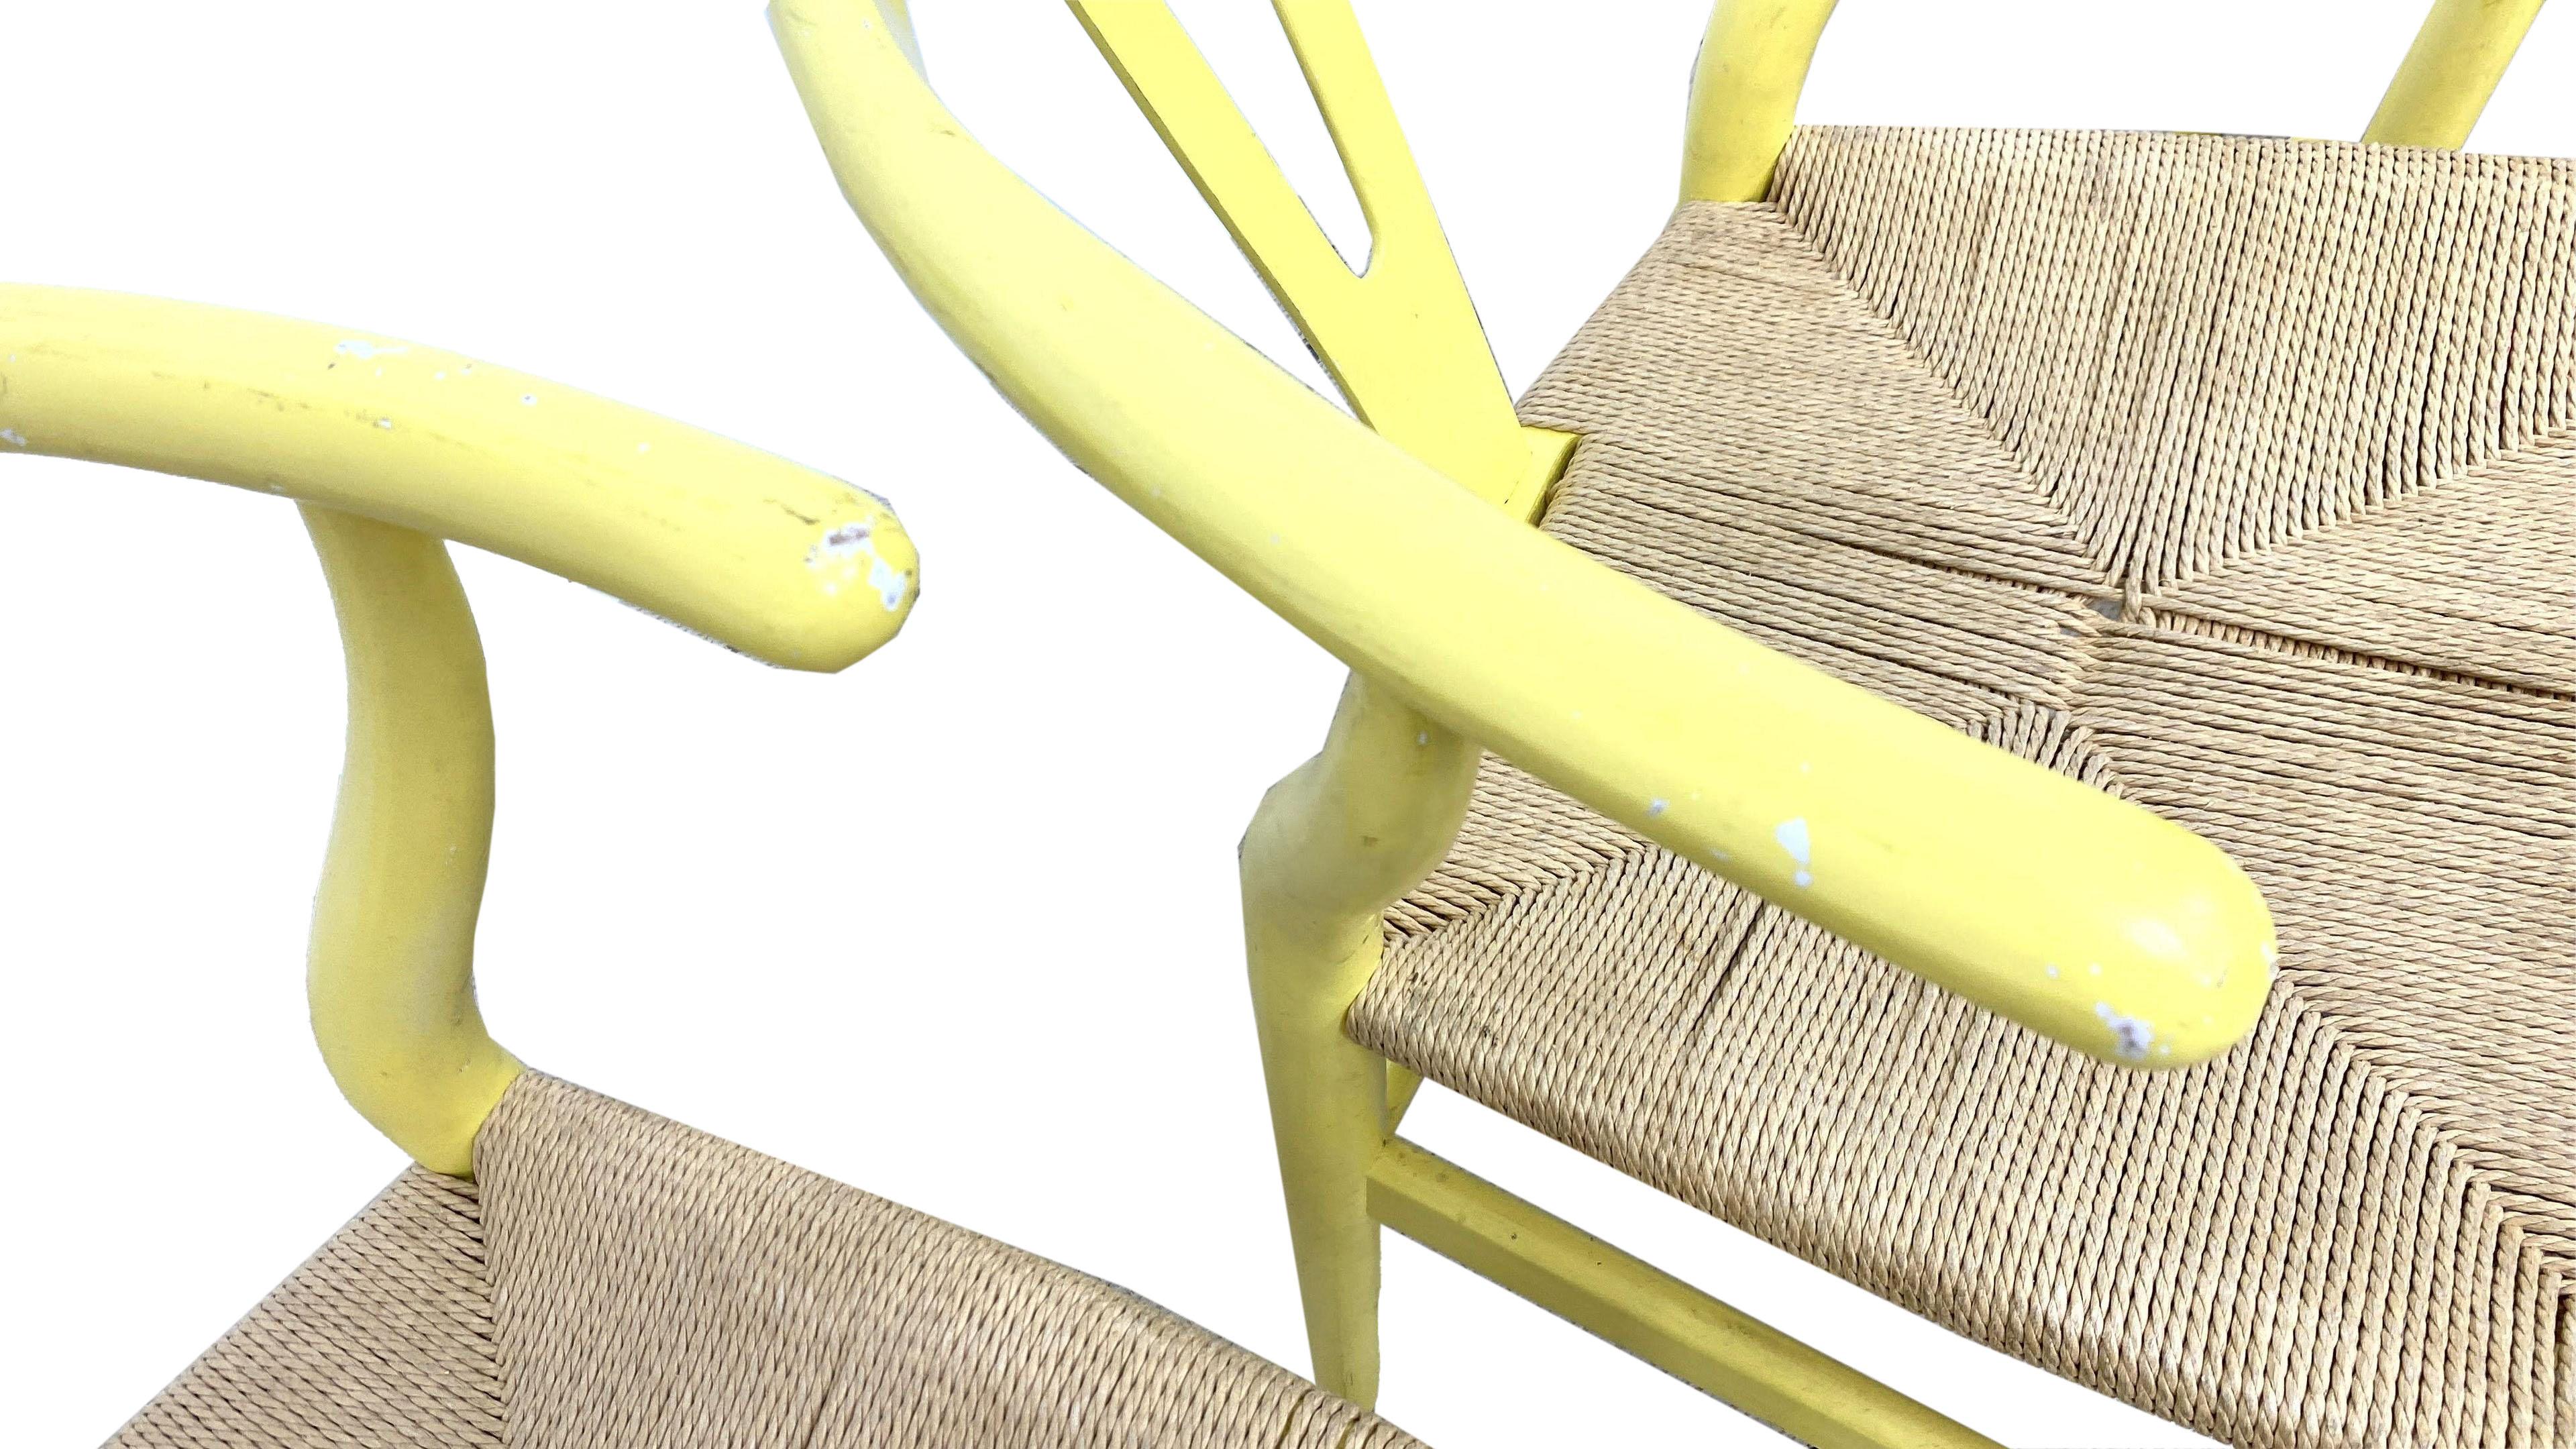 These wishbone chairs are painted in a wonderful yellow with rush seats.

In 1944, Danish designer Hans Wegner began a series of chairs that were inspired by portraits of Danish merchants sitting in Ming chairs. One of these chairs was the